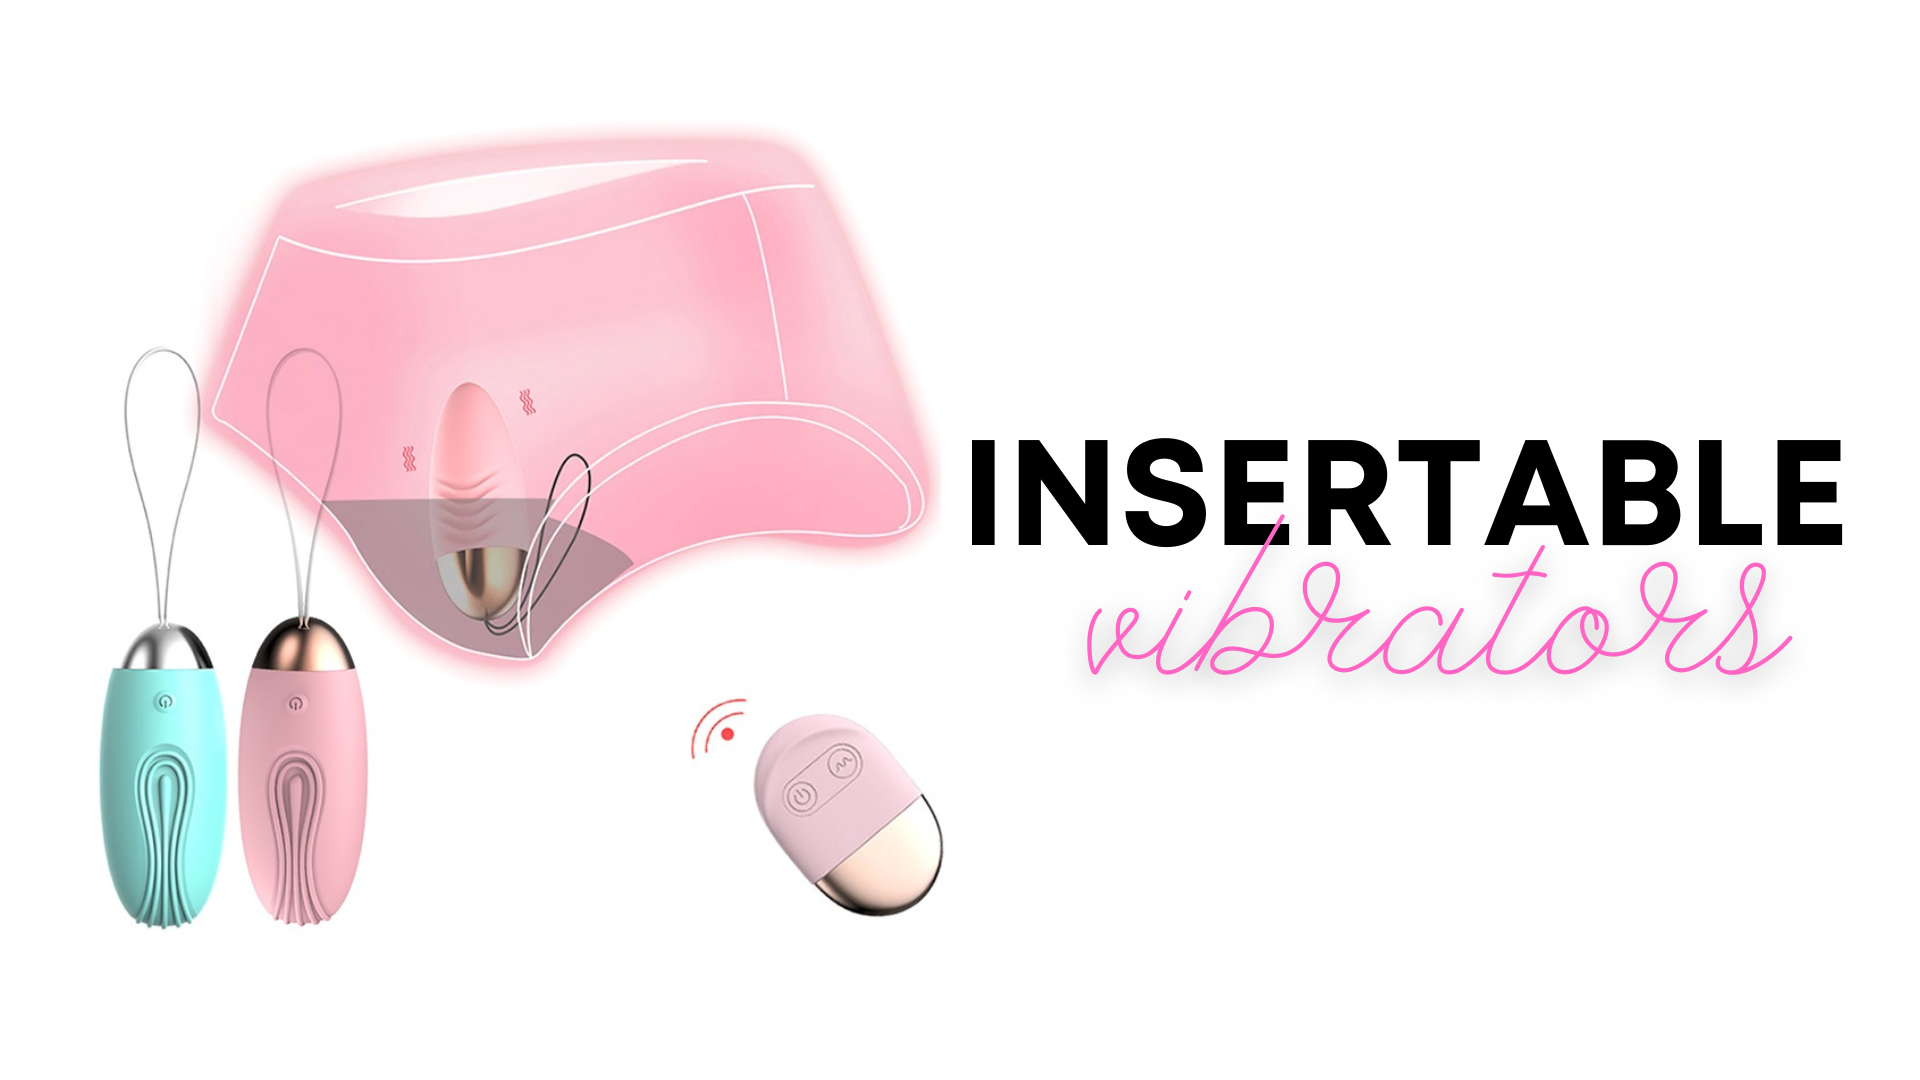 A pink and blue Insertable Vibrators with a pink panty